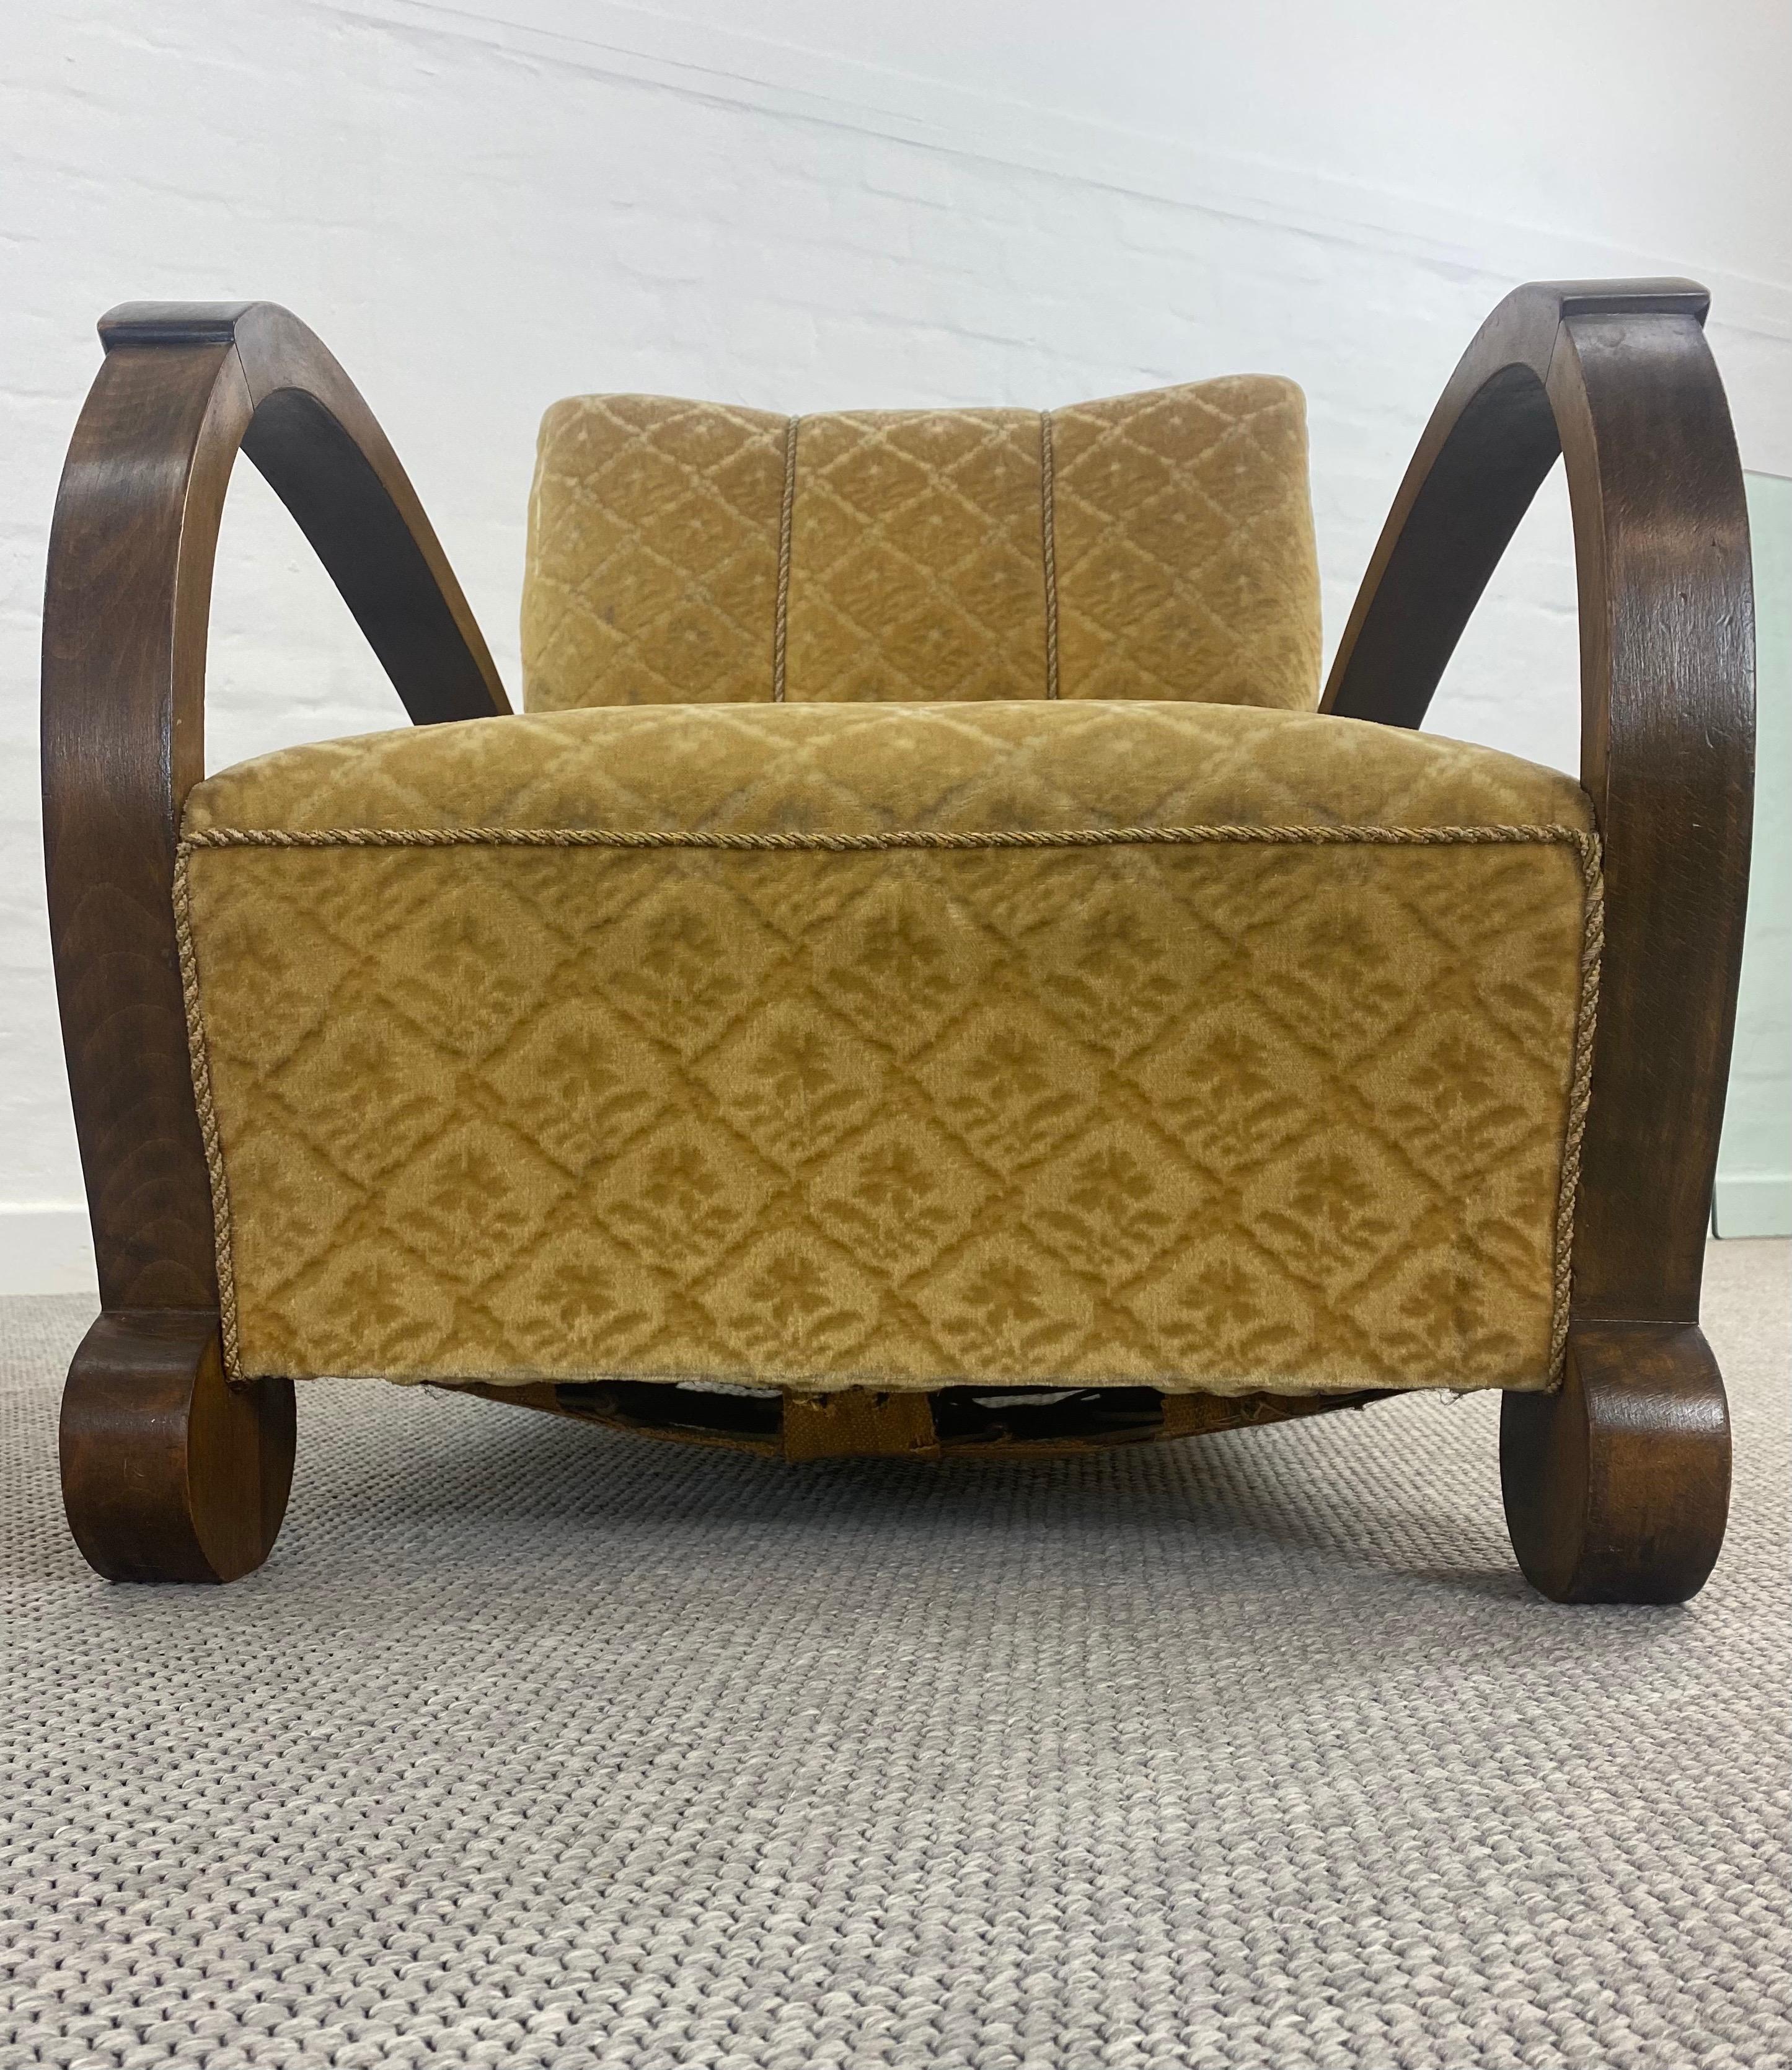 A very unusual original pair of armchairs, Germany ,1920s.
With the deep sprung seats and dramatically bow armrests these chairs are very comfortable.
The round geometric foot elements are associated with the Bauhaus era.